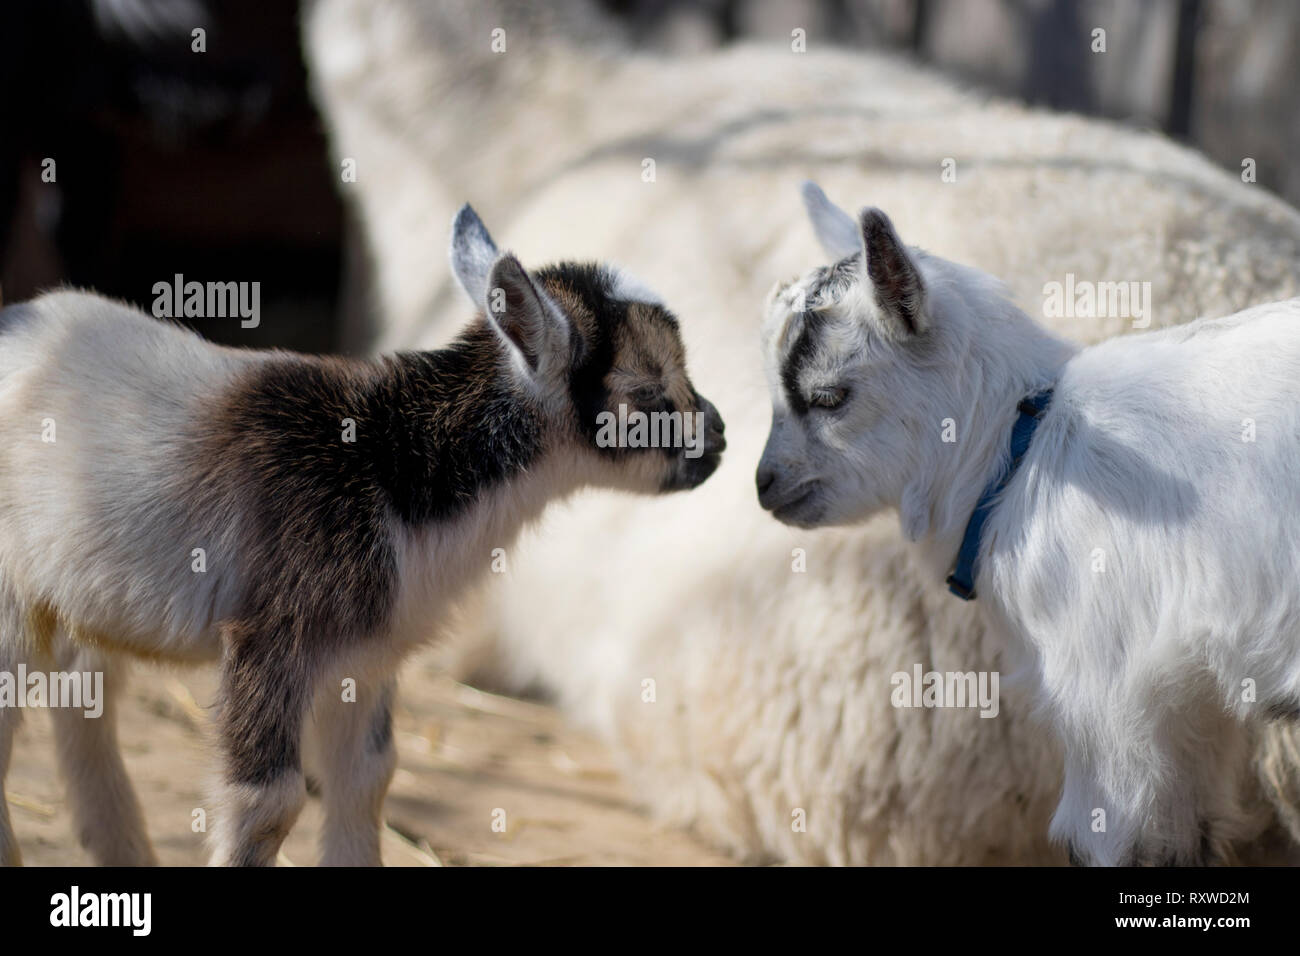 Two small African pygmy goats looking at each other. Adorable baby goats on a farm. Animal rescue and petting zoo. Stock Photo